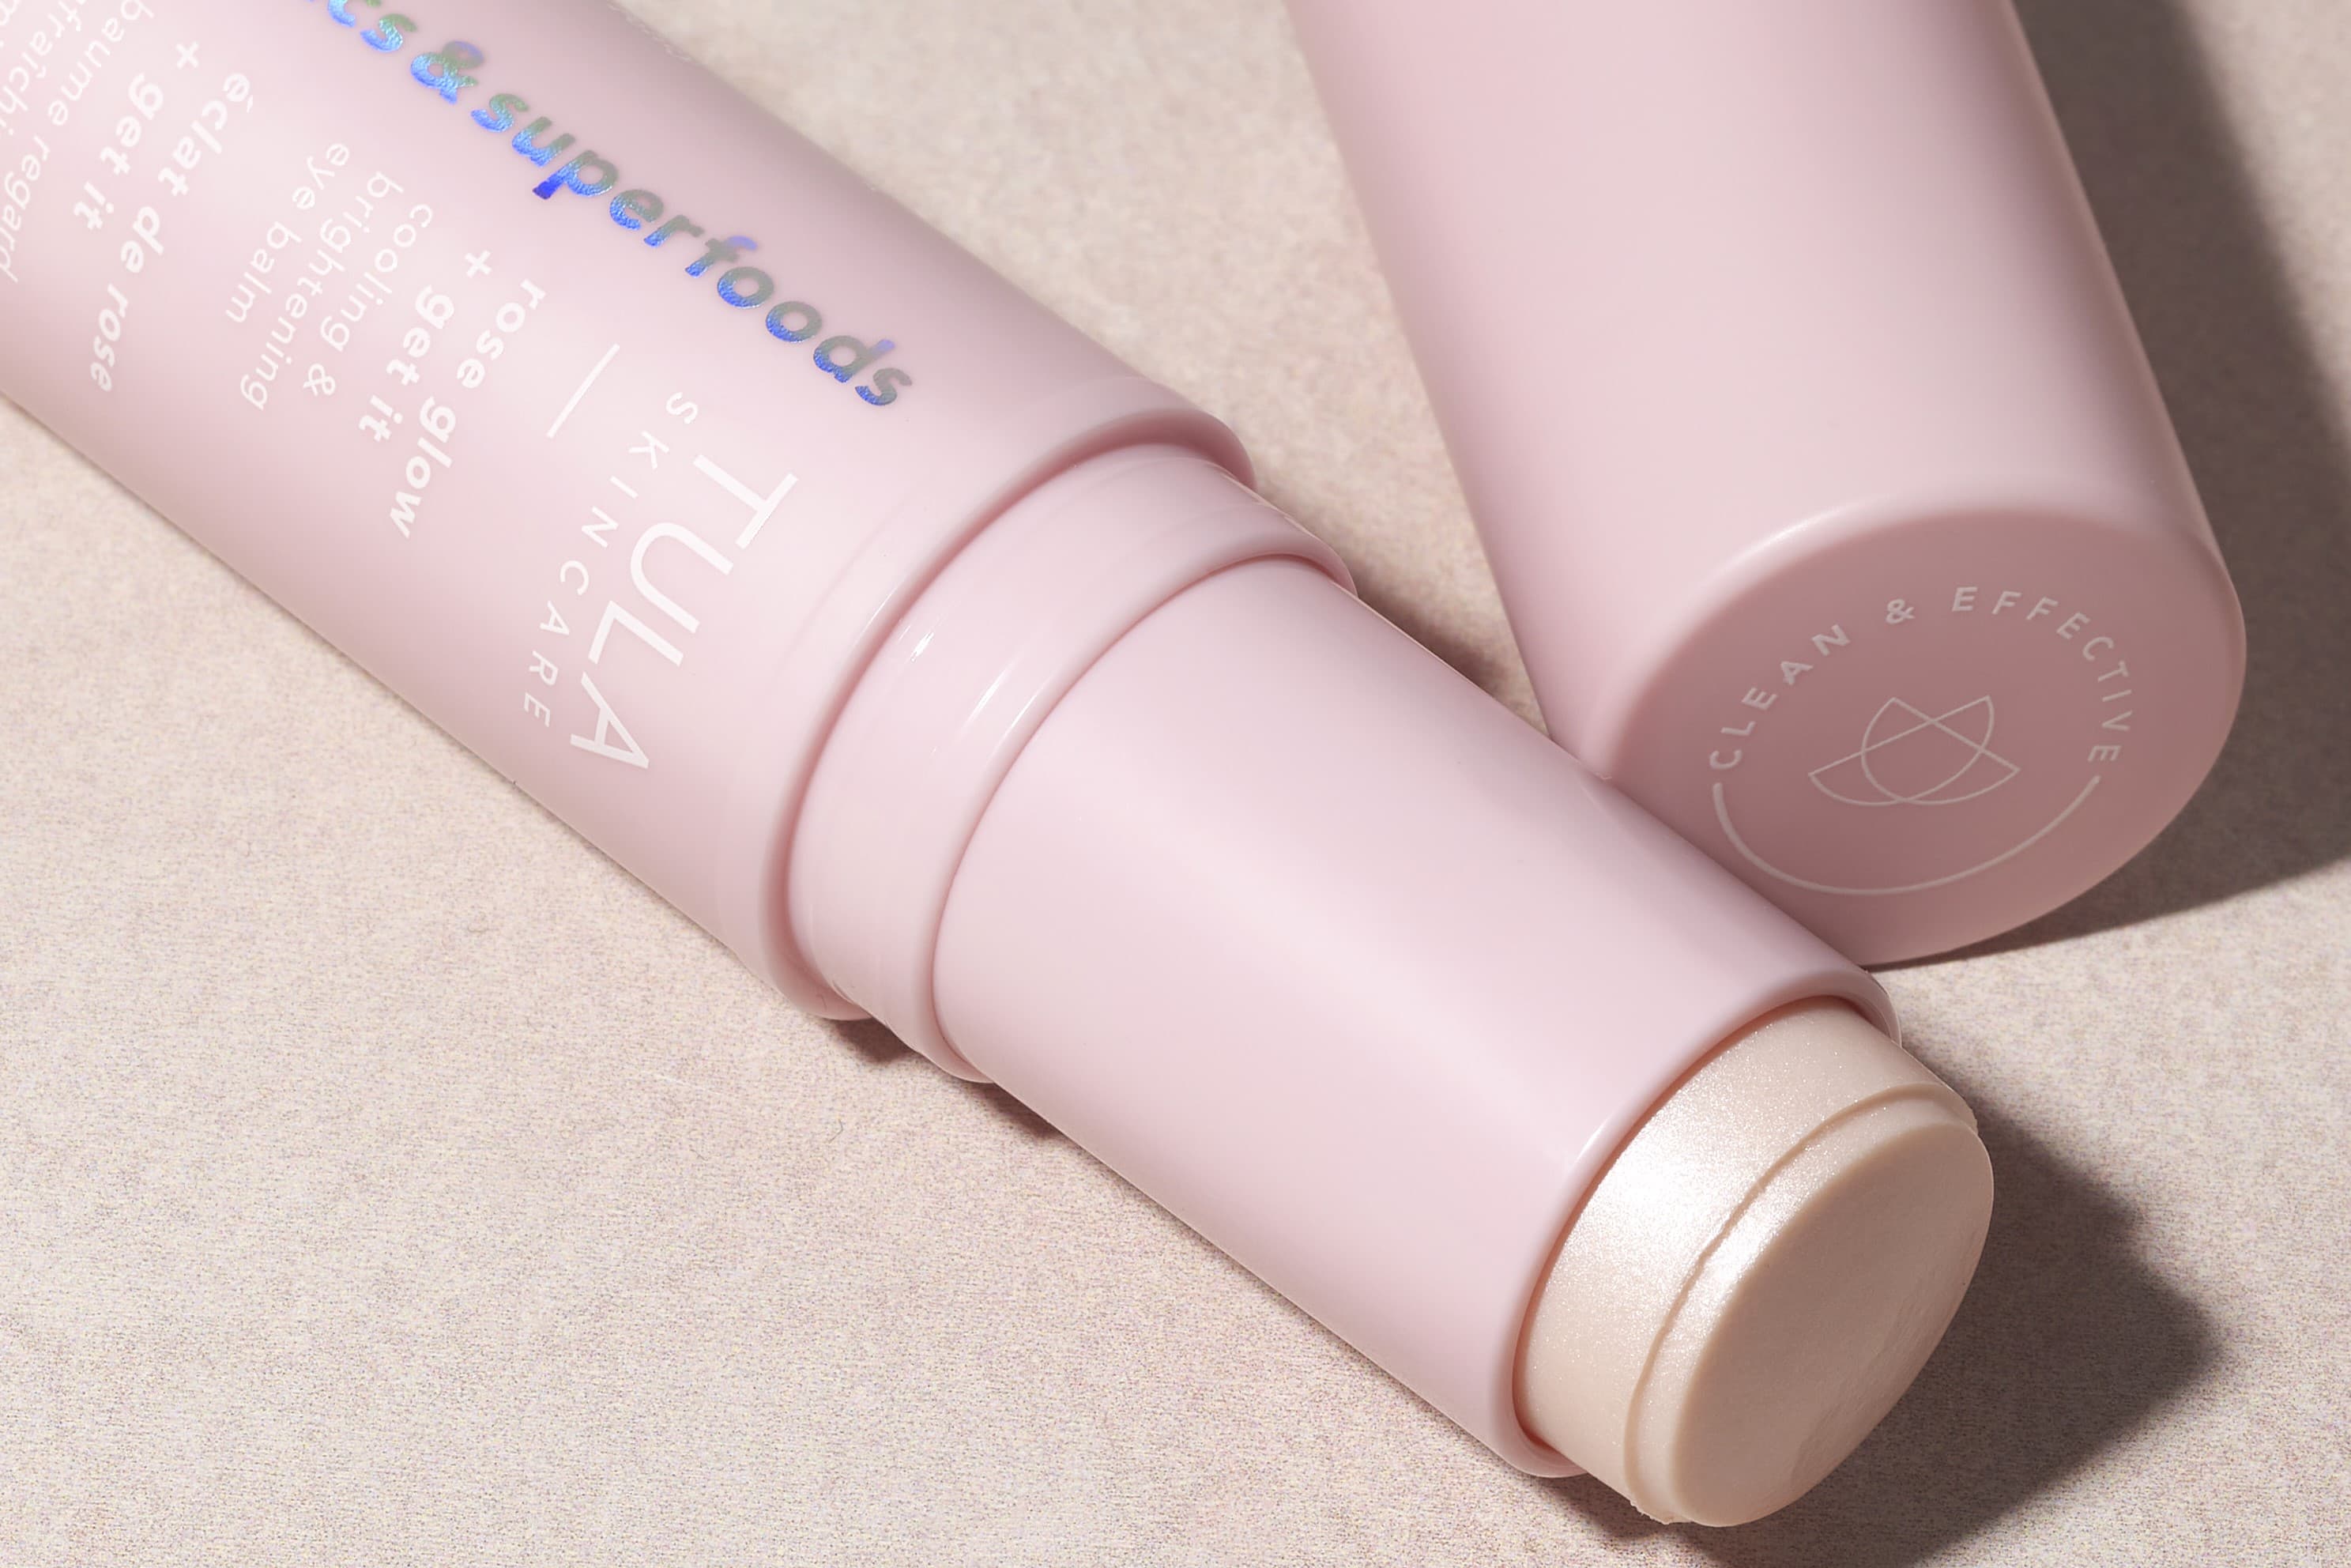 Space NK's Beauty Editor Reviews Of The Tula Eye Balm